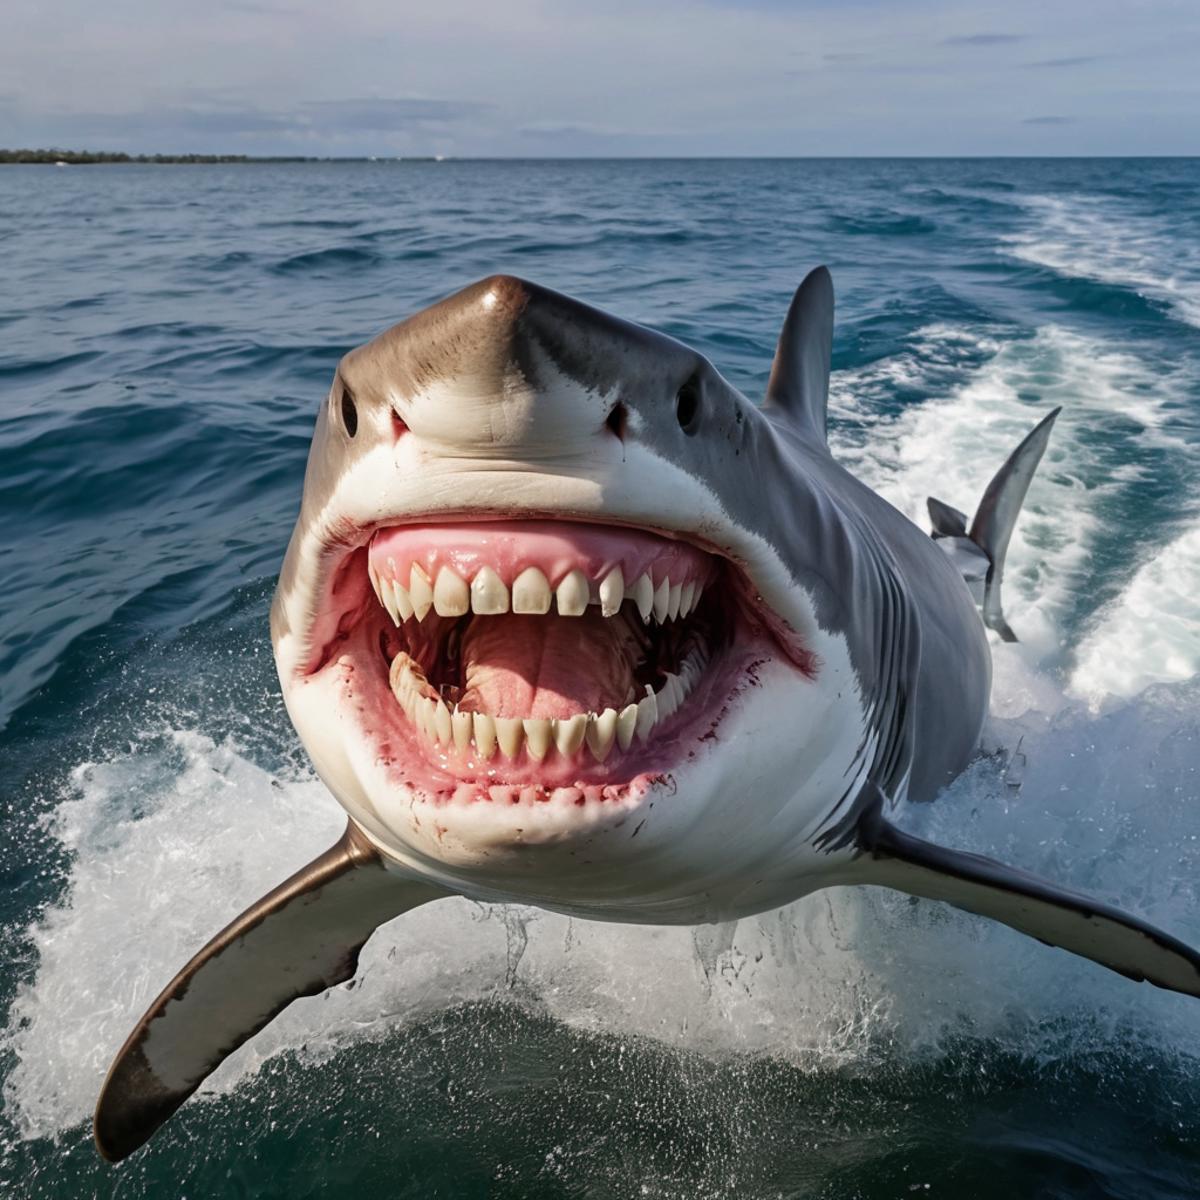 A shark with a mouth full of teeth is swimming in the ocean.